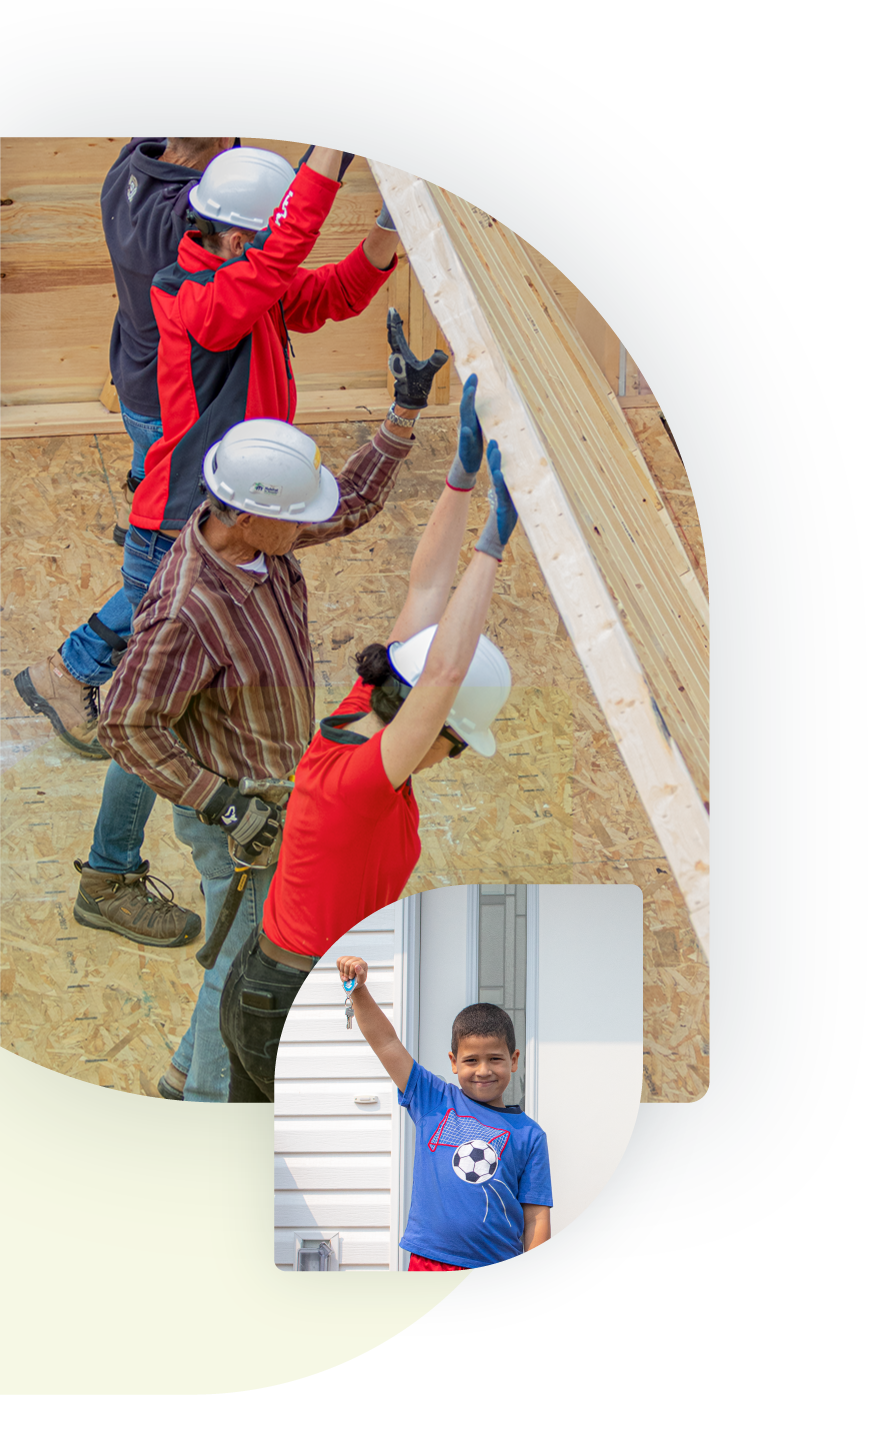 Habitat for humanity volunteers building a house